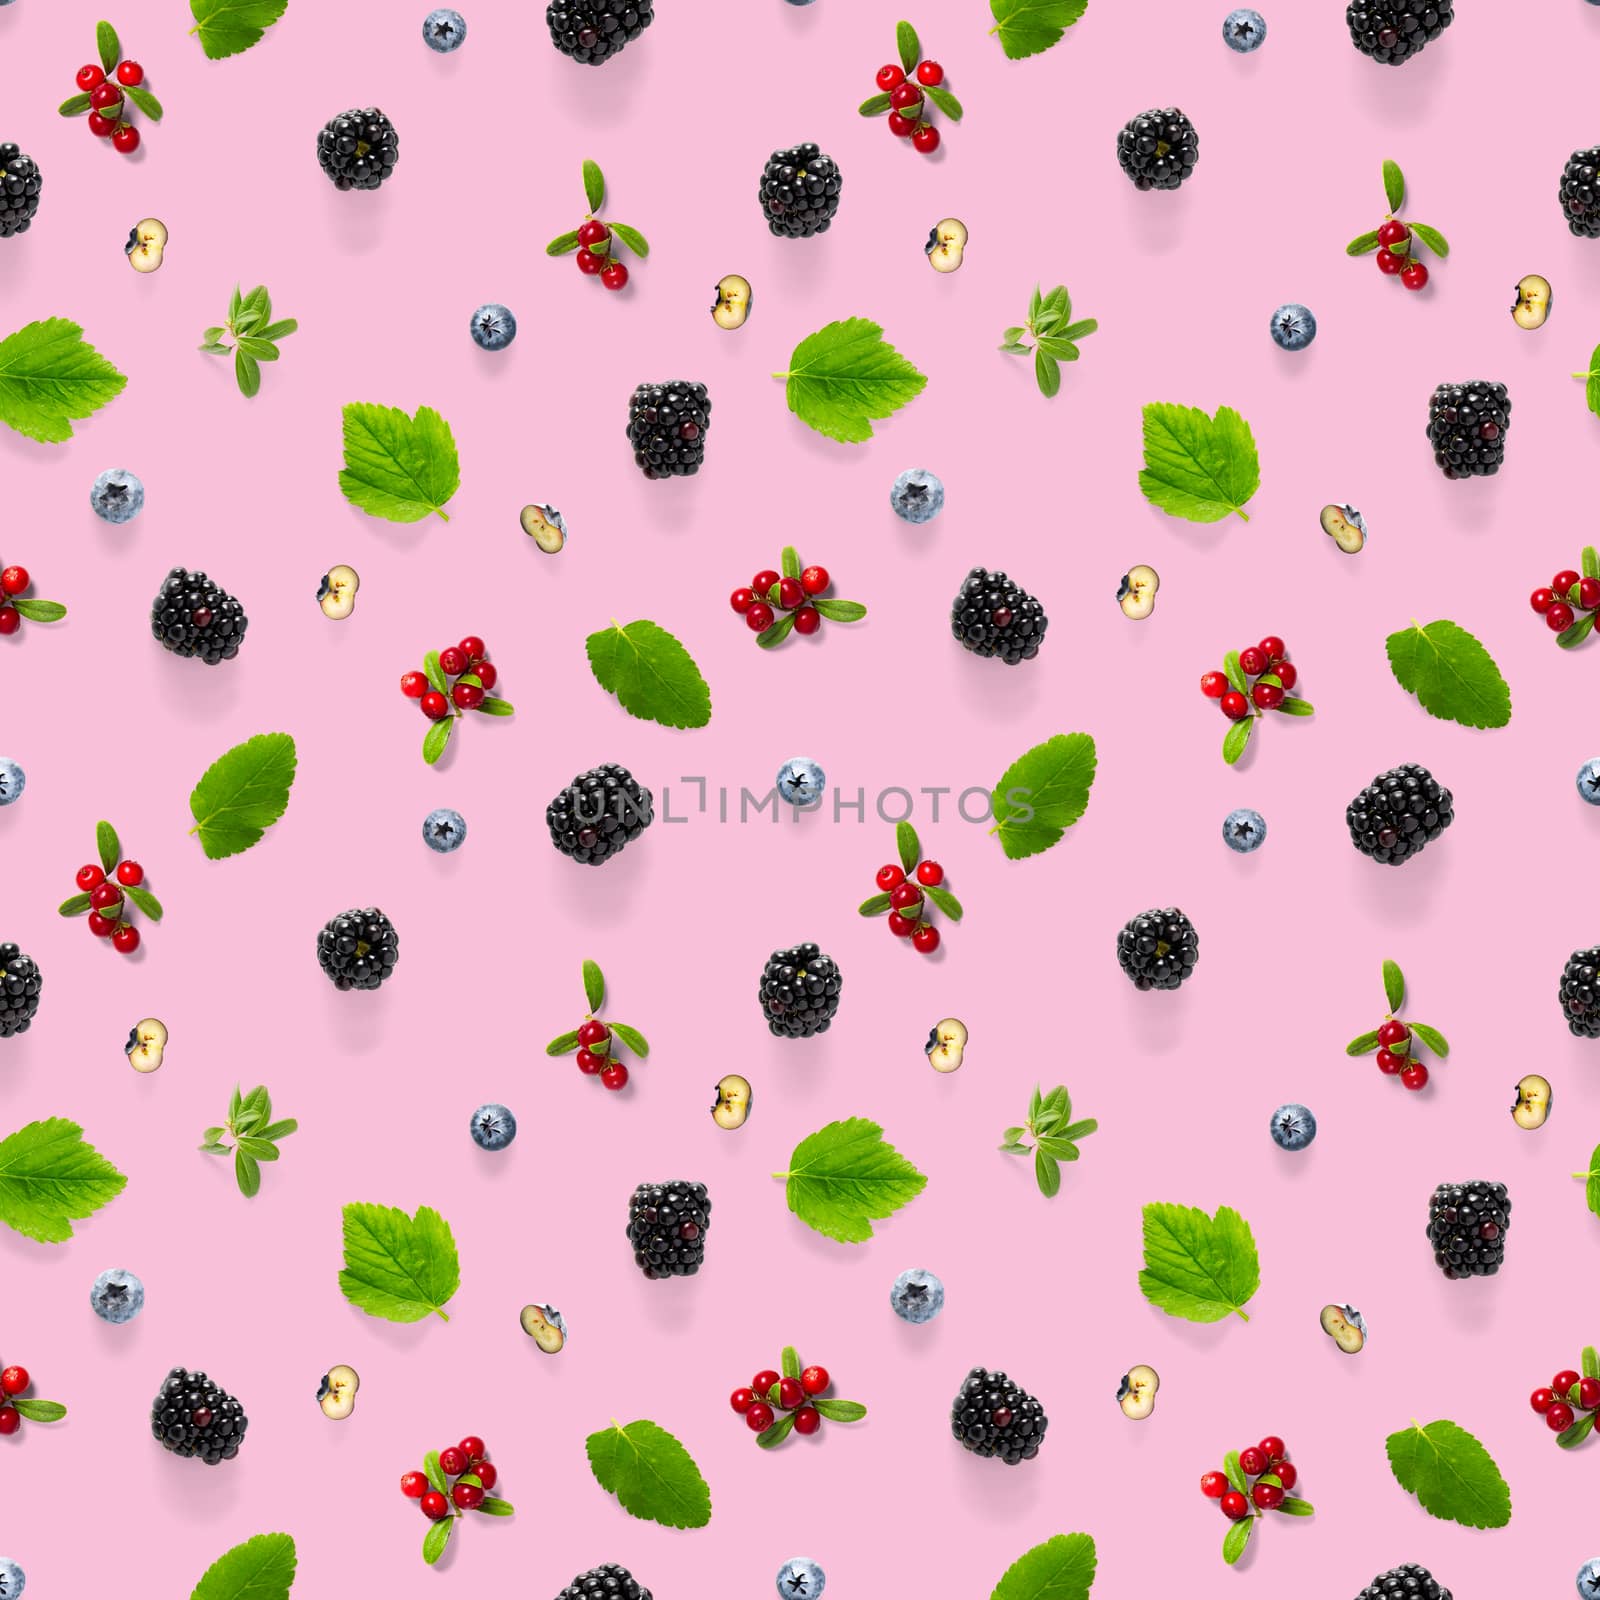 Creative seamless pattern of wild berries, blackberry, blueberry, lingonberry and bramble. modern seamless pattern on pink backgriund made from autumn forest wild berries. Forest berries mix